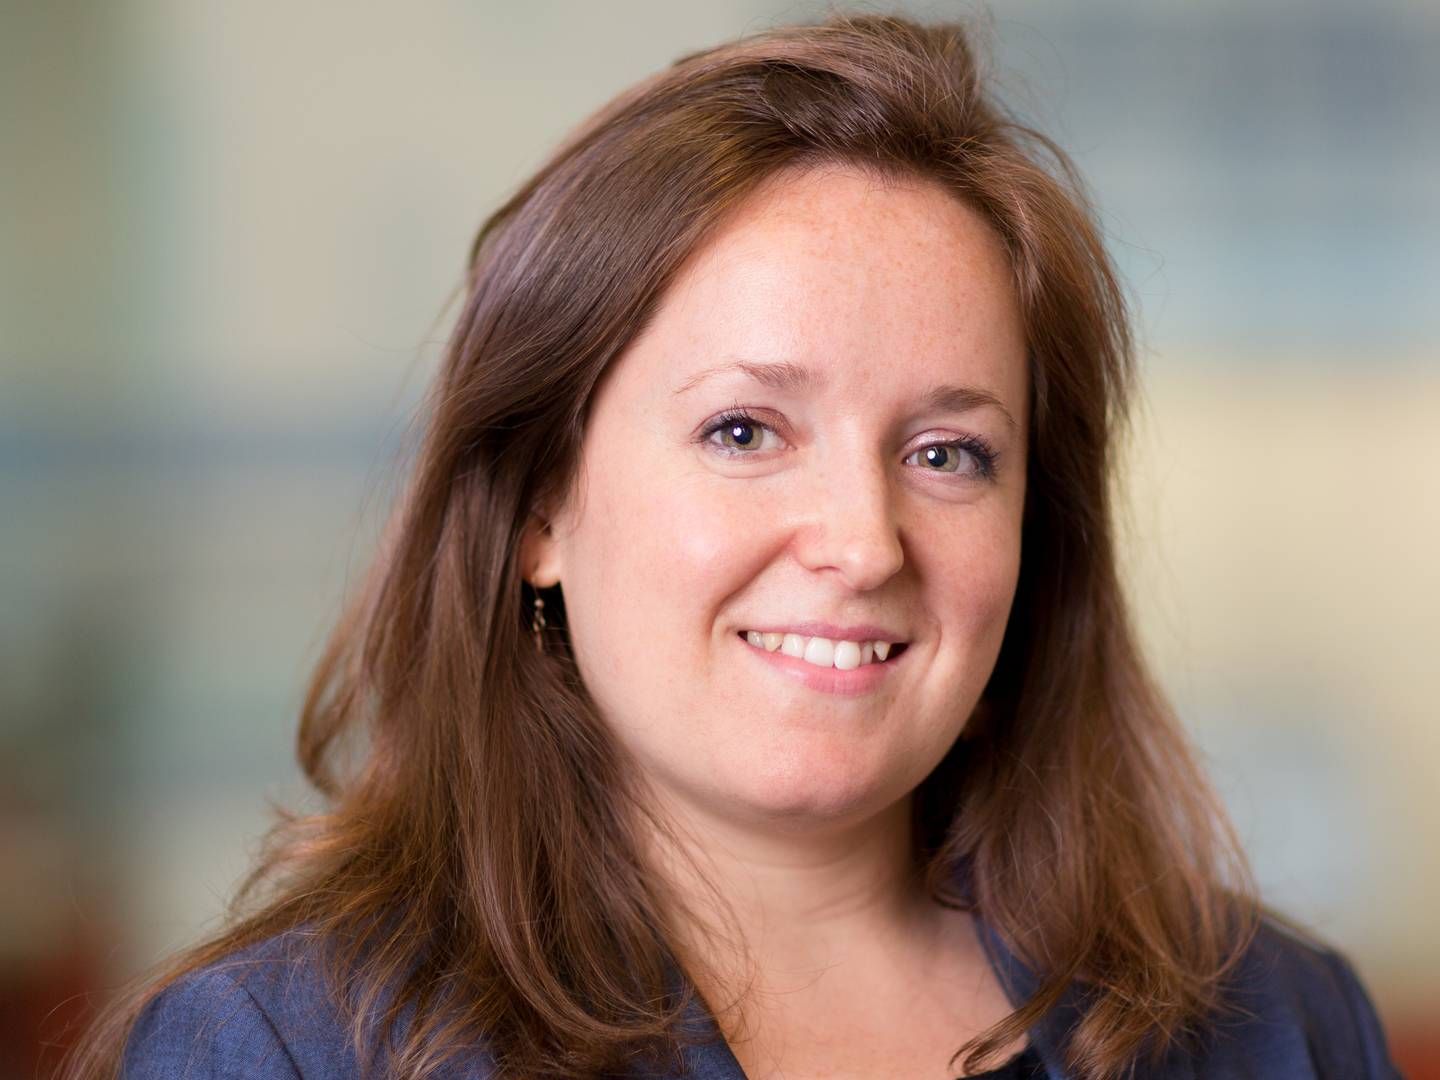 The Anthropocene Fixed Income Institute (AFII) has hired Josephine Richardson as head of portfolio strategy | Photo: PR / The Anthropocene Fixed Income Institute